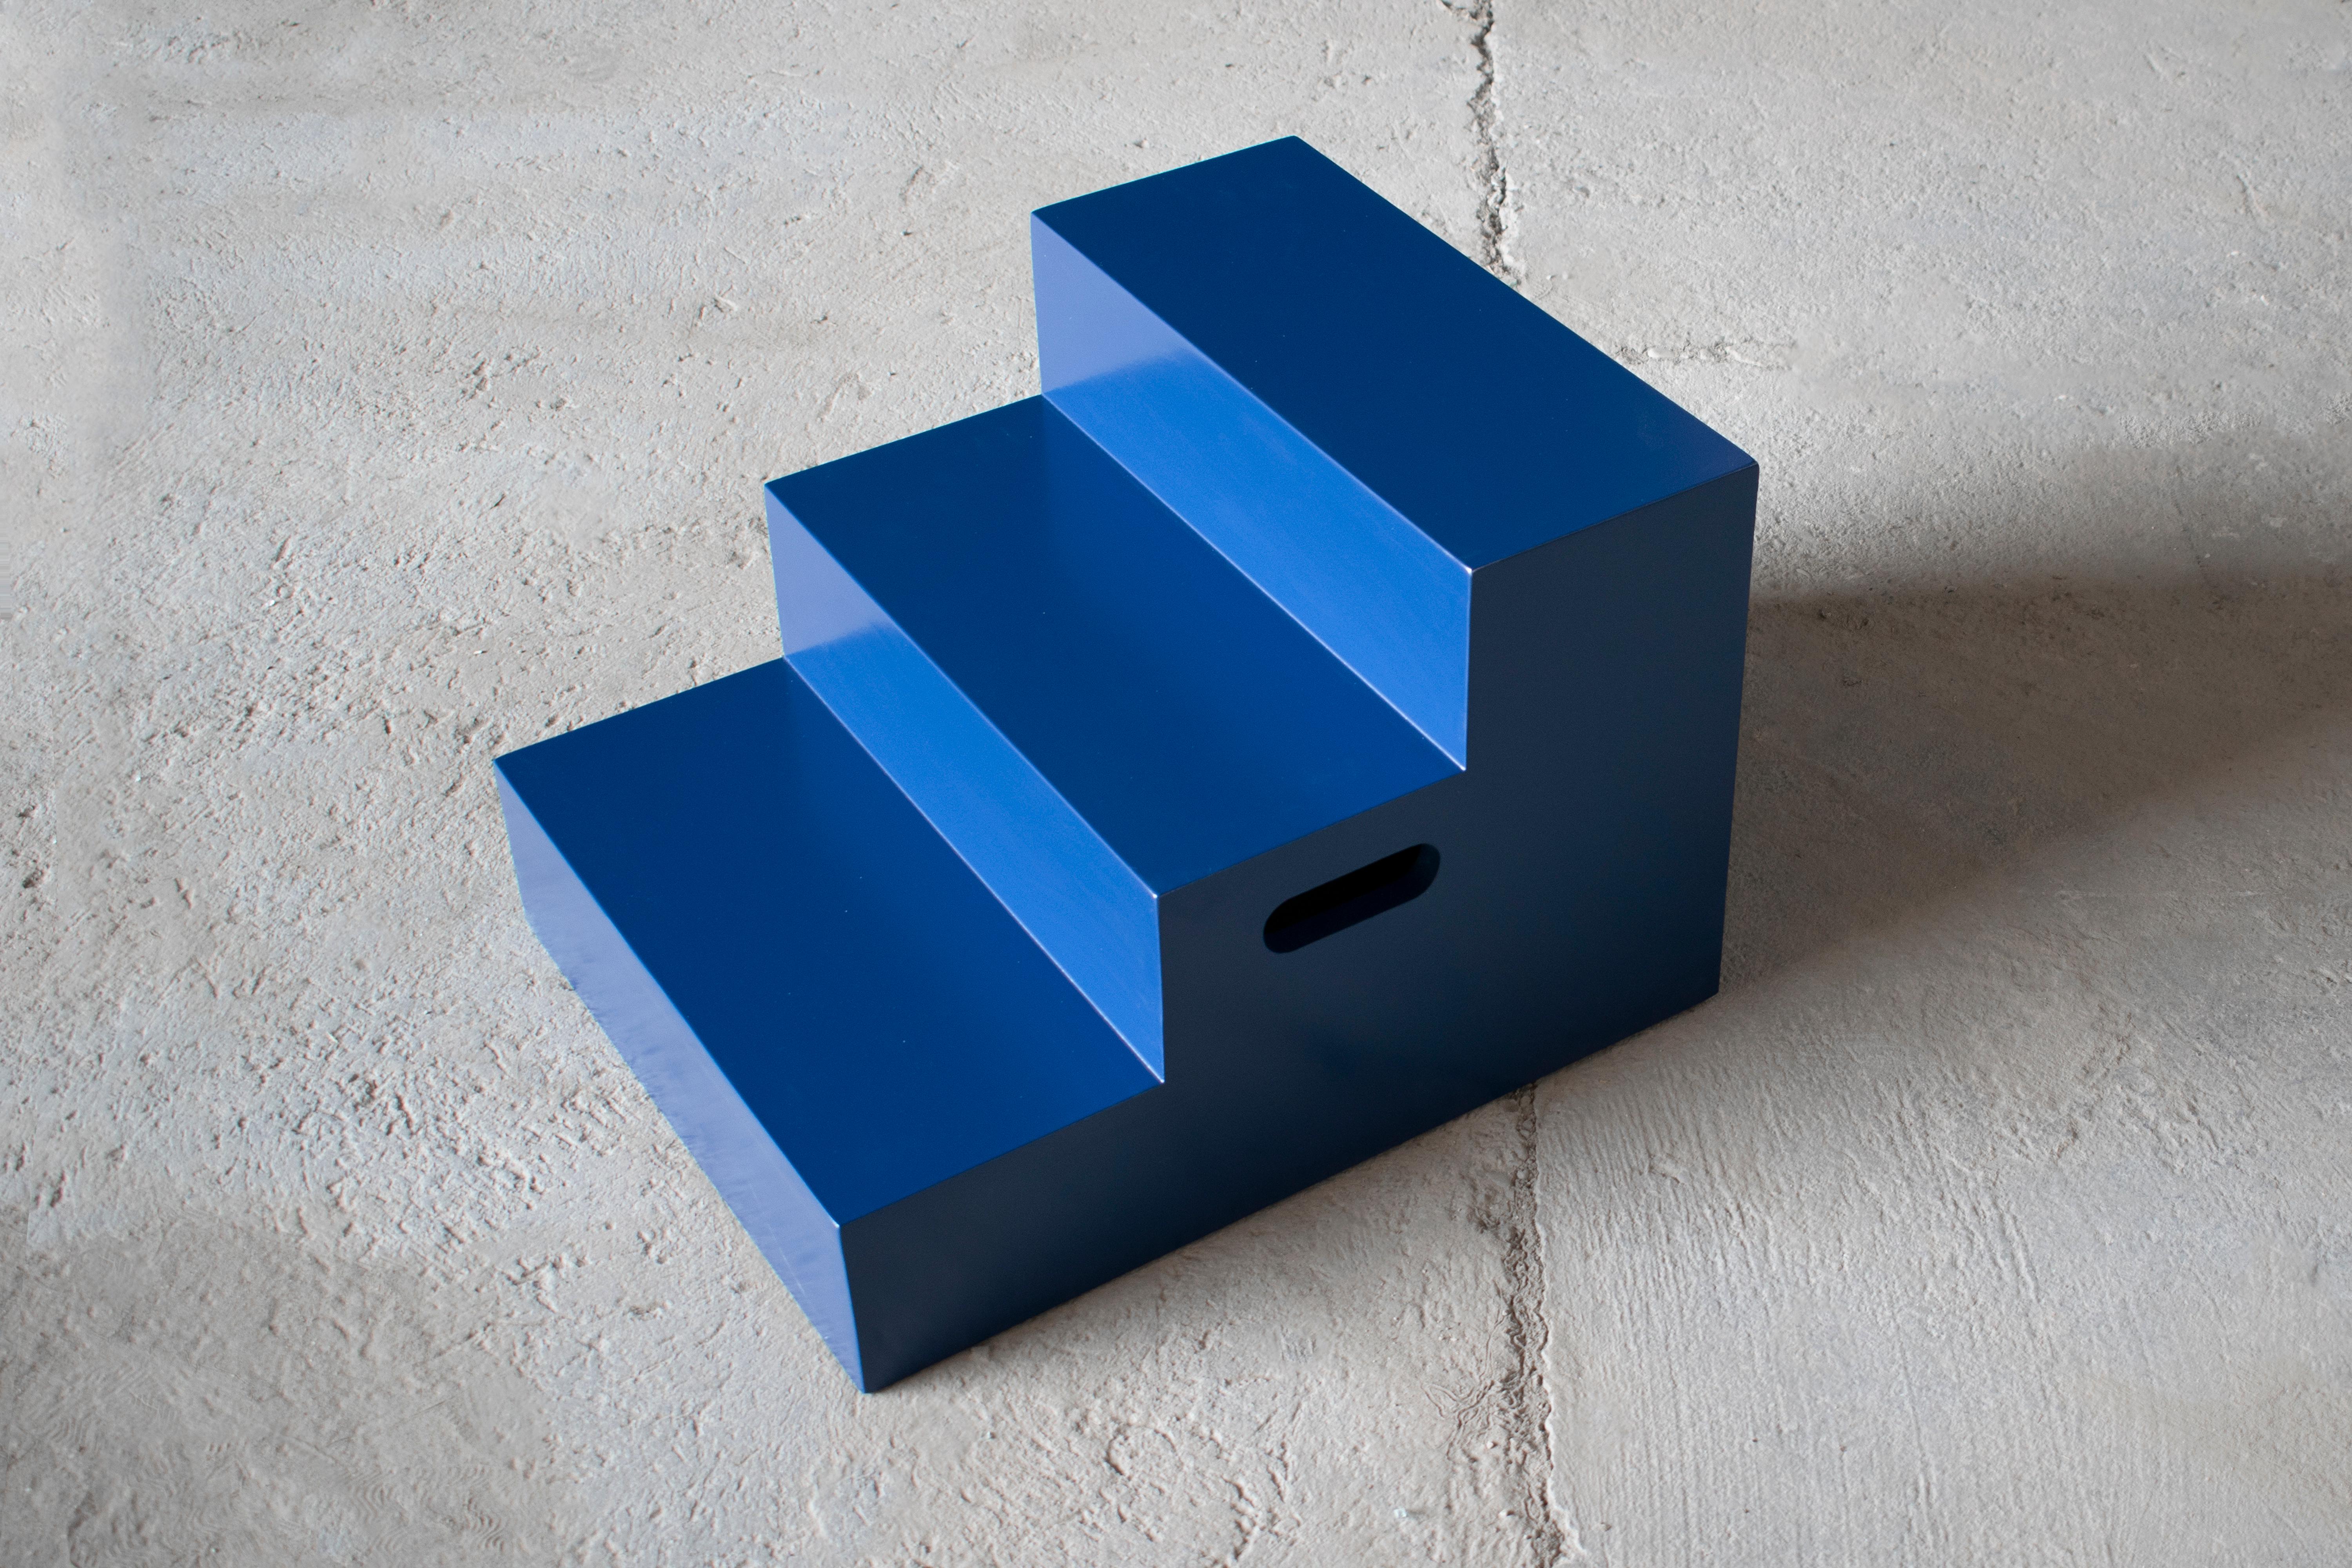 MDF wood lacquered in dark blue colour. 

This design piece is a versatile companion to various functions. Serving as a nightstand, side bed table or stepping surface, the prismatic ladder is a moving furniture ready to be used within larger areas